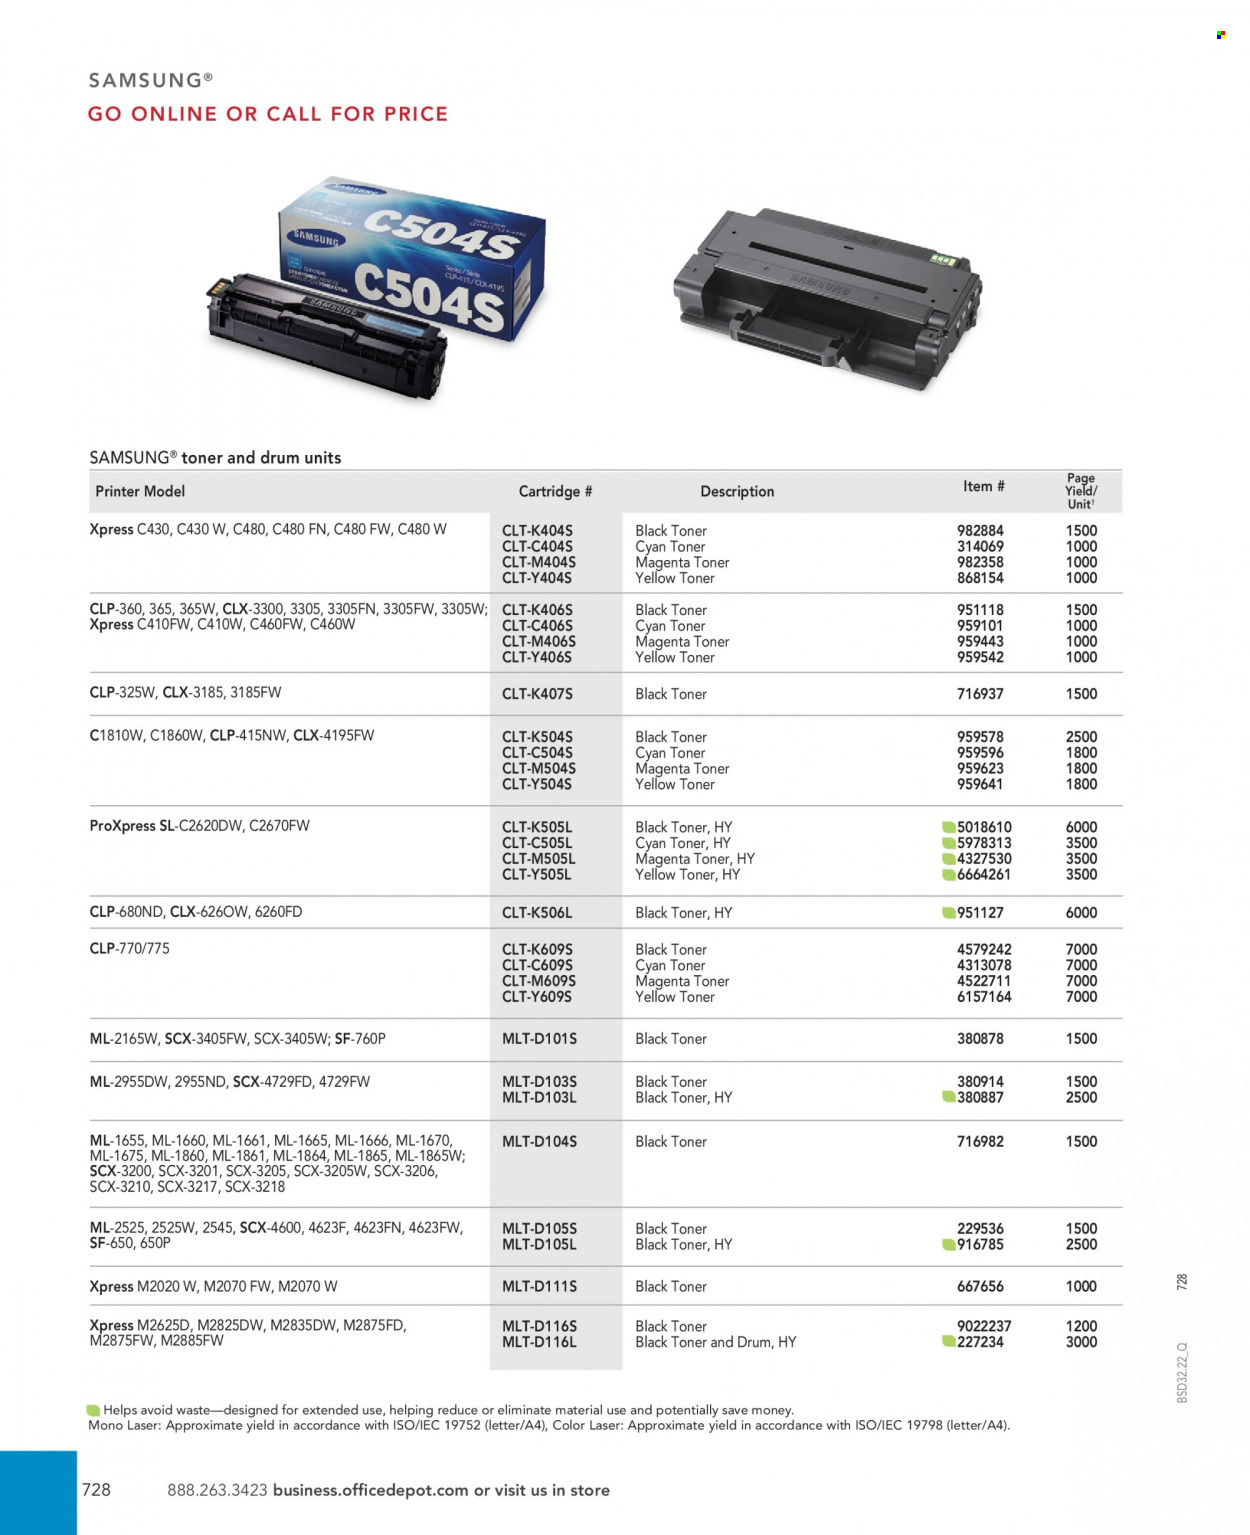 thumbnail - Office DEPOT Flyer - Sales products - Samsung, printer, toner, cartridge. Page 728.